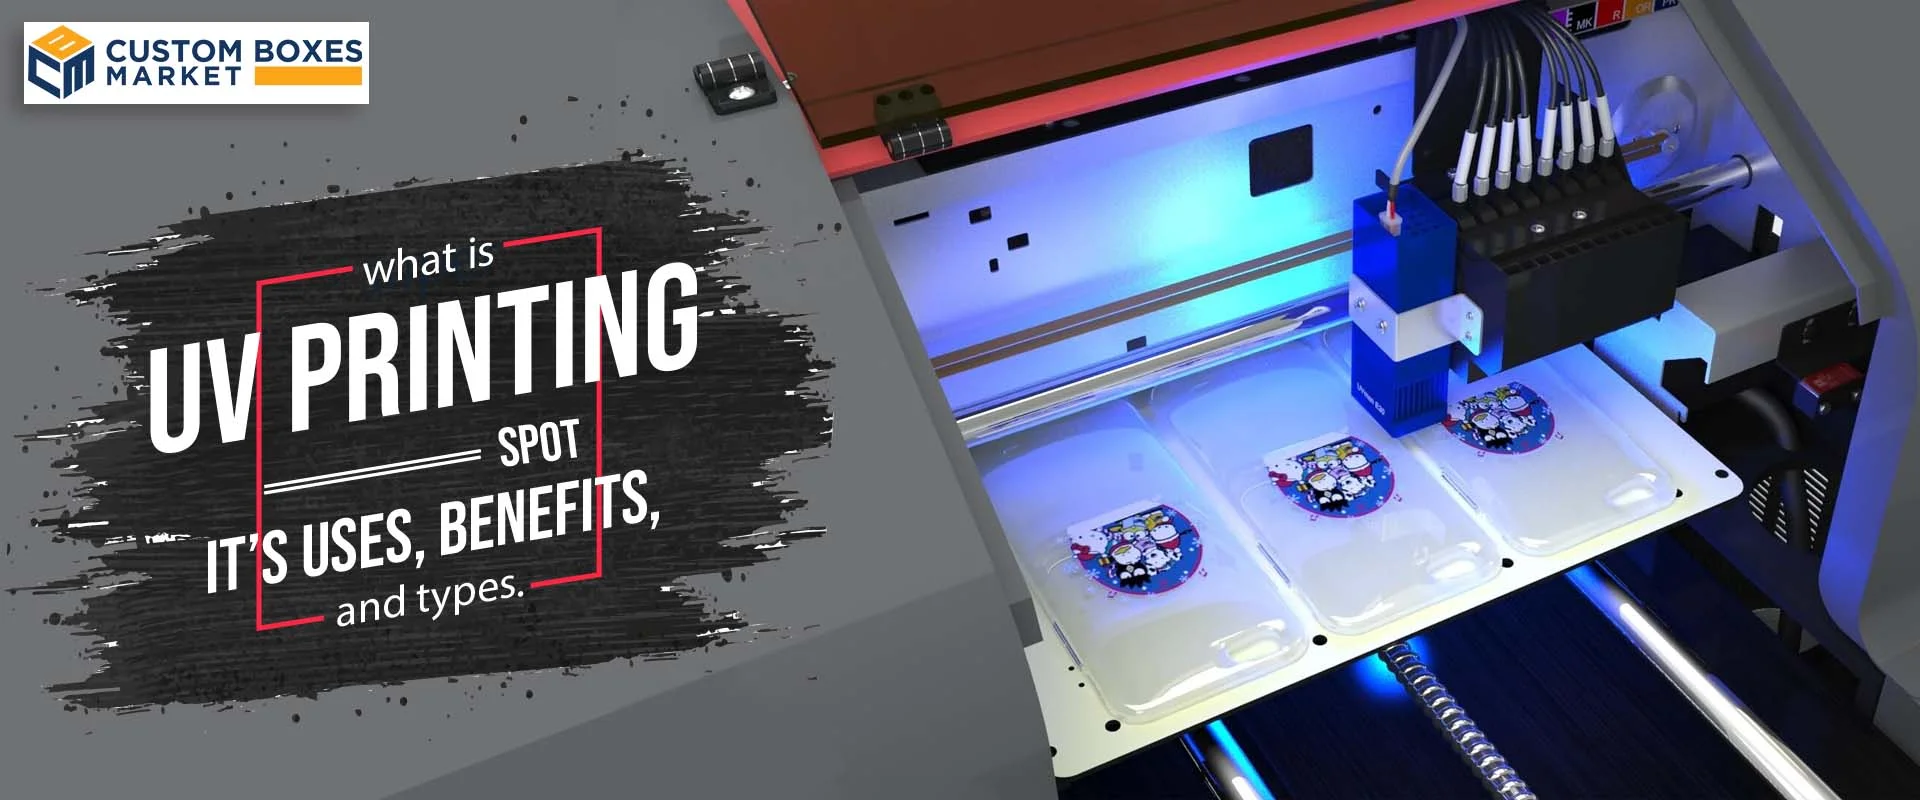 What is Spot UV Printing? Its Uses, Benefits, And Types